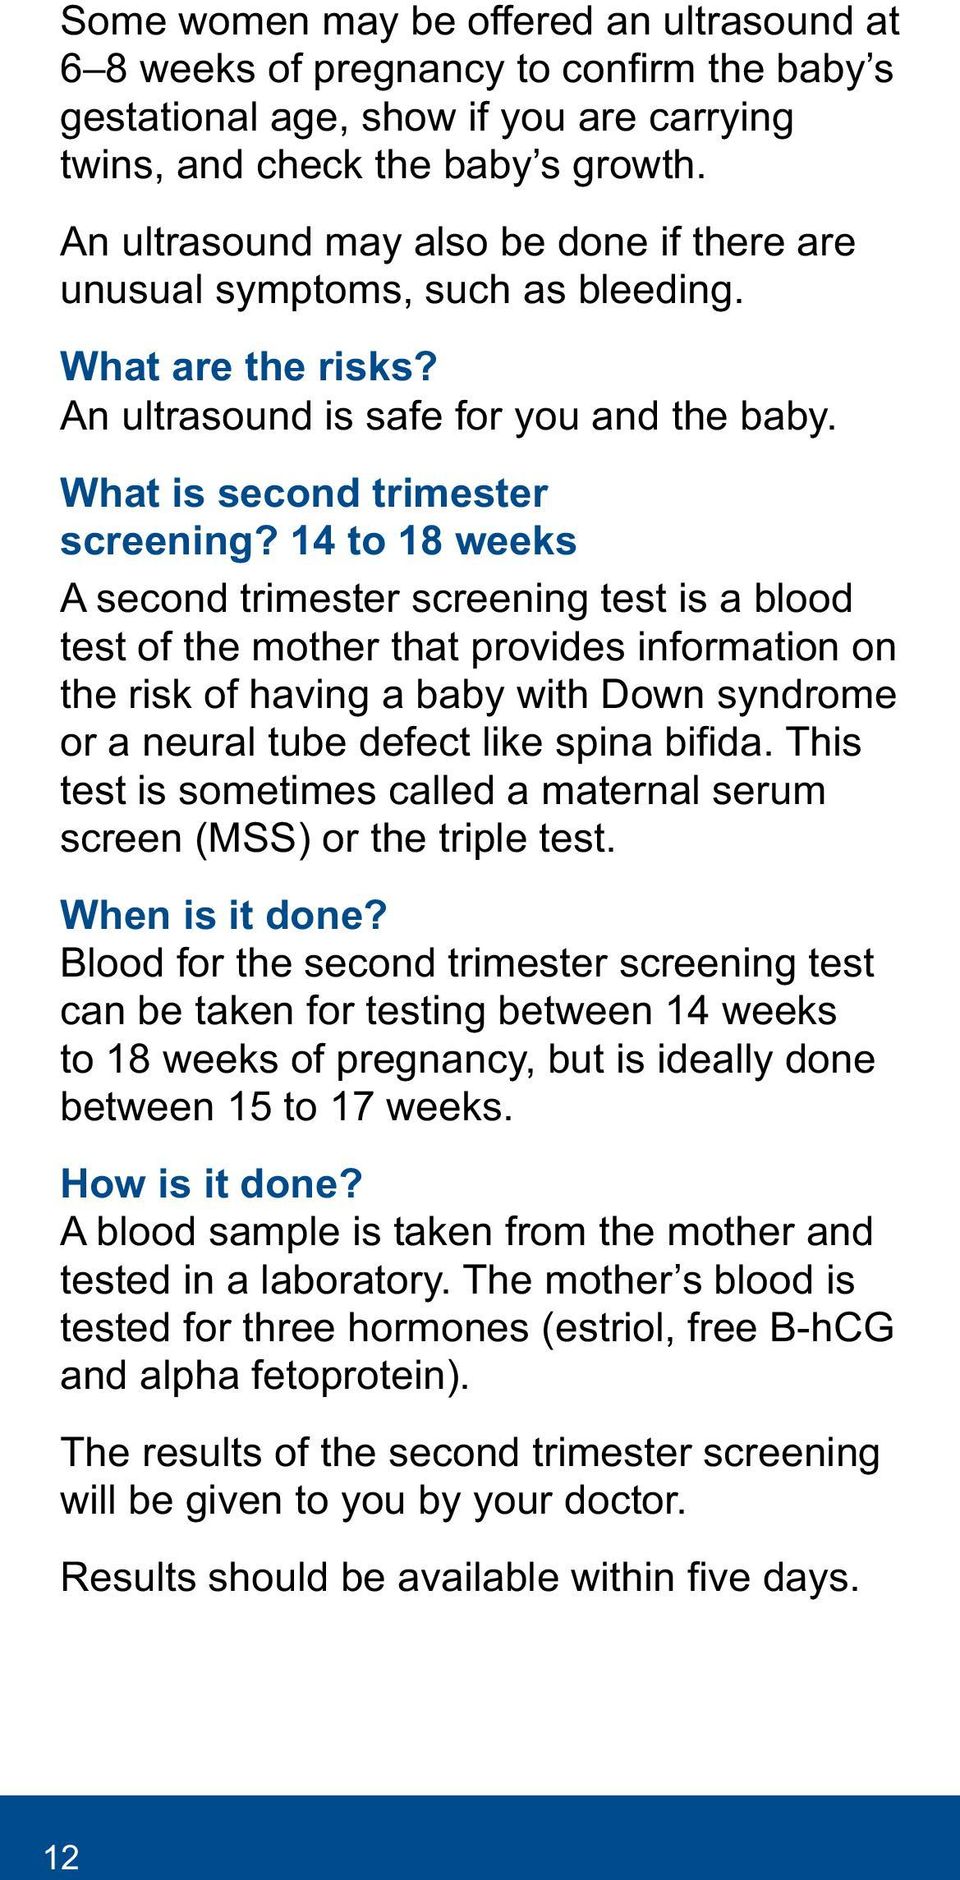 14 to 18 weeks A second trimester screening test is a blood test of the mother that provides information on the risk of having a baby with Down syndrome or a neural tube defect like spina bifida.